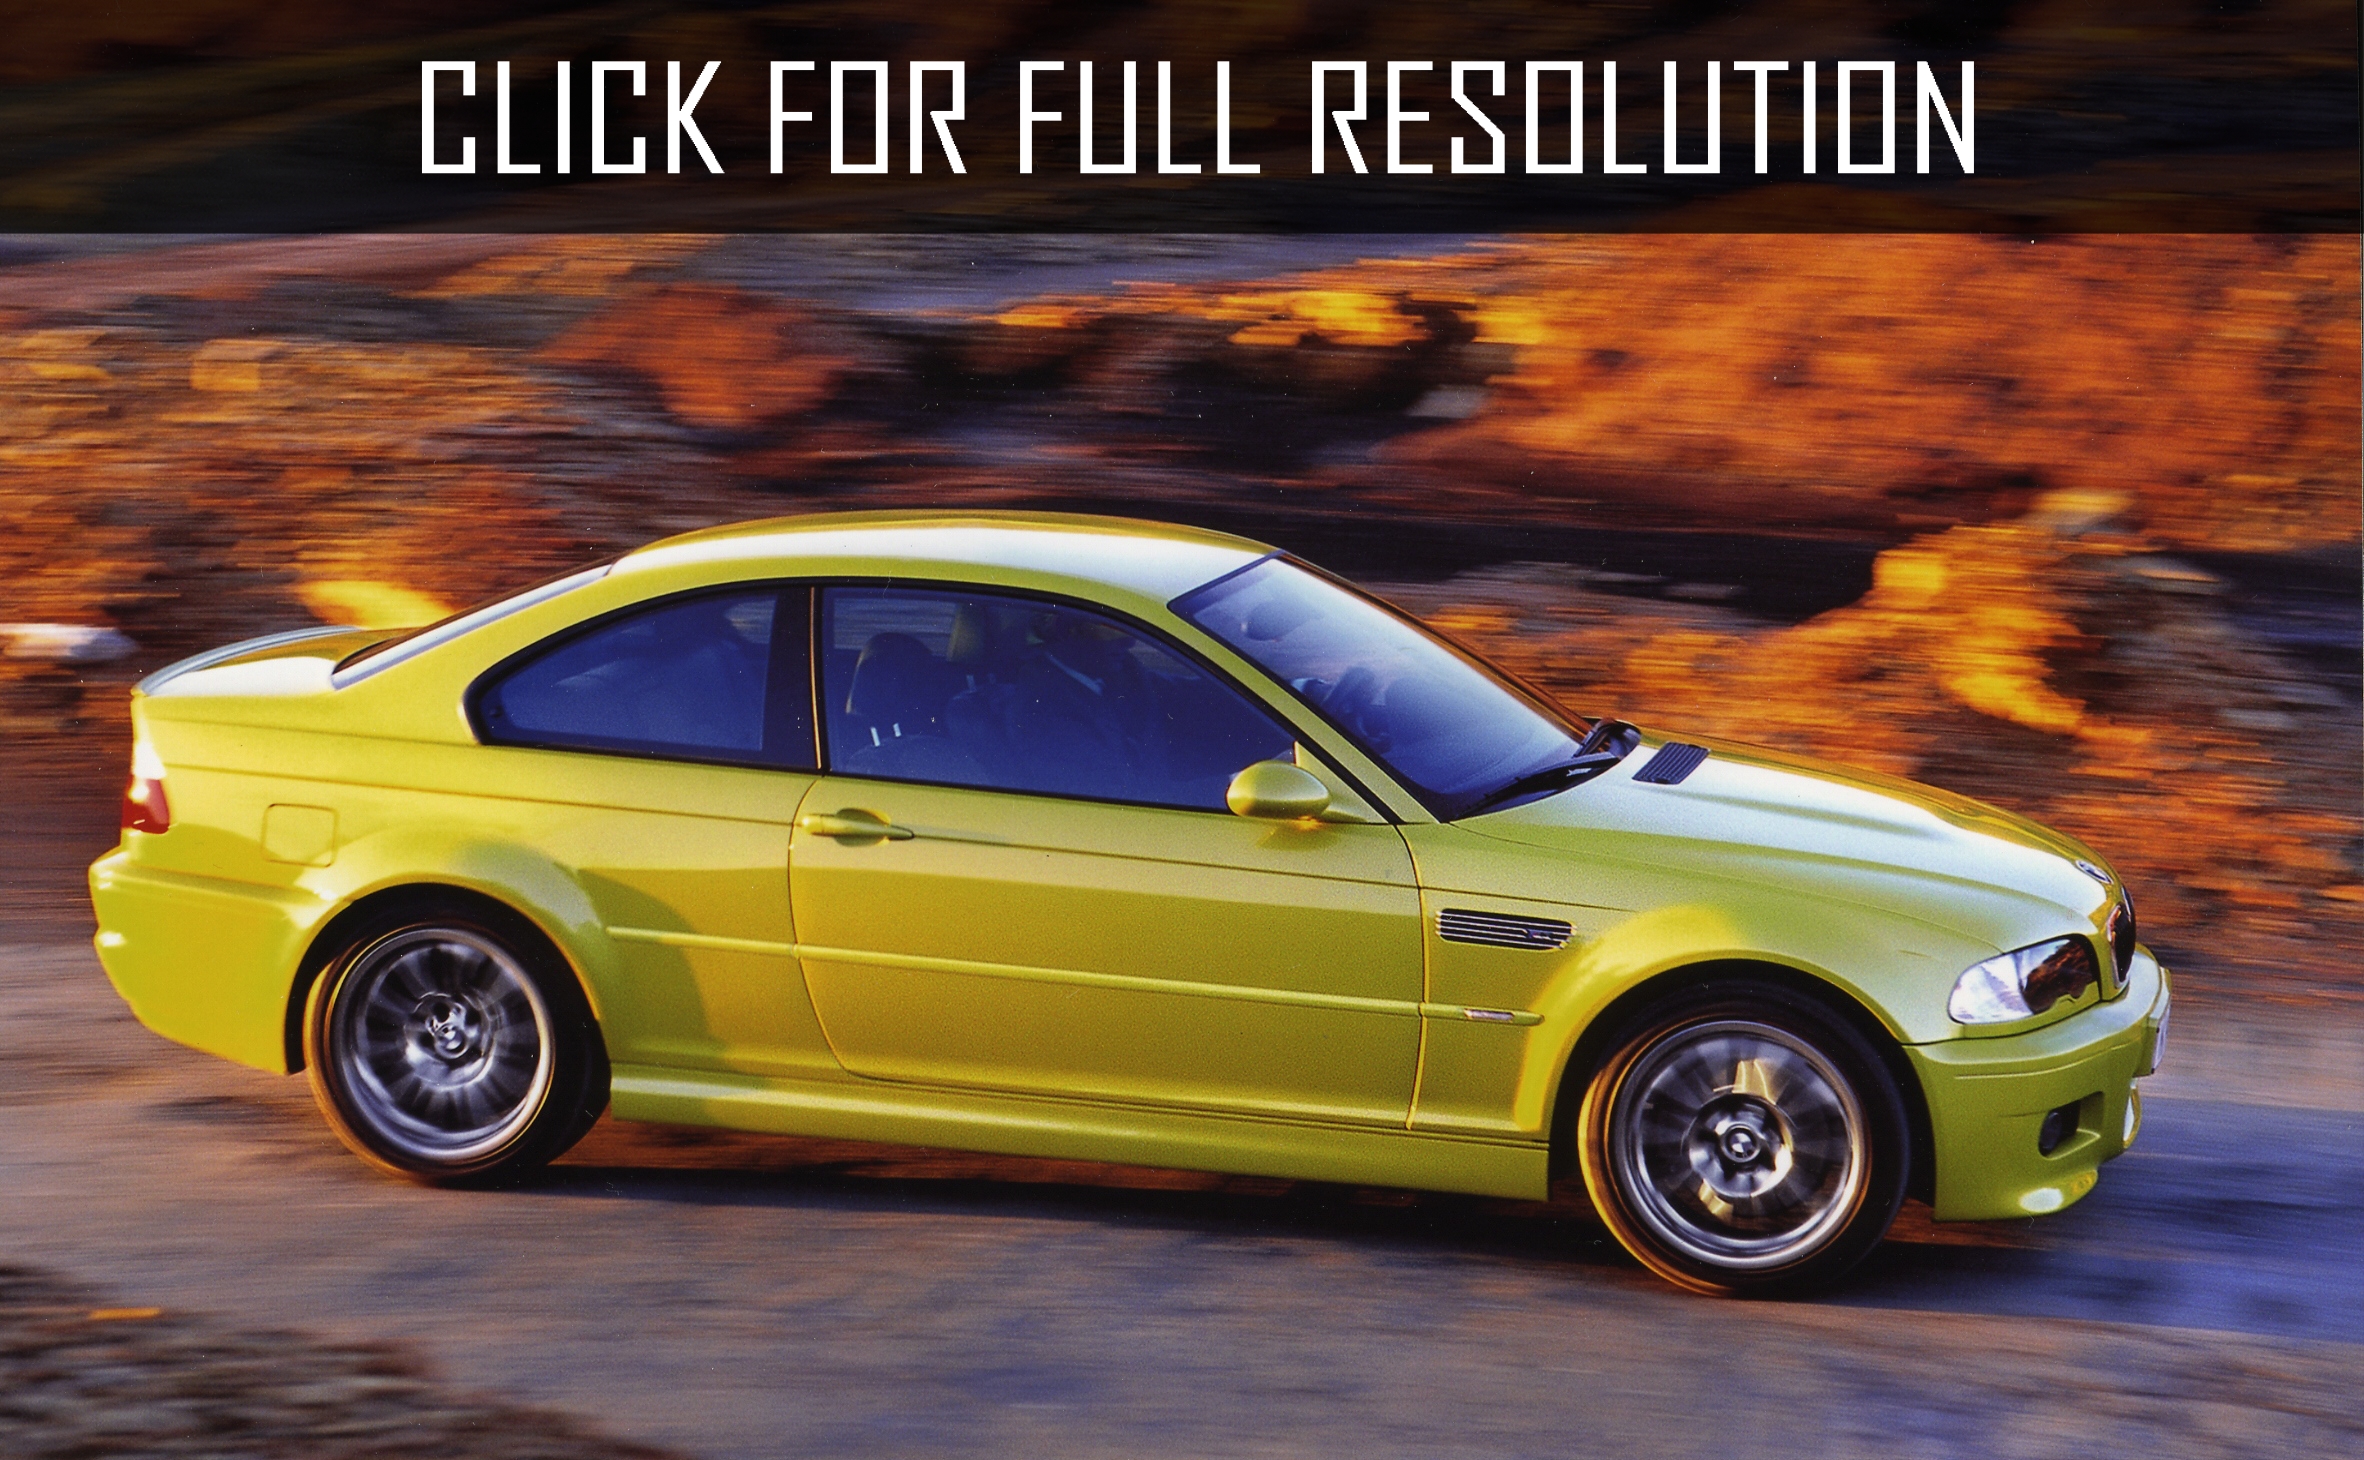 2000 Bmw E46 M3 news, reviews, msrp, ratings with